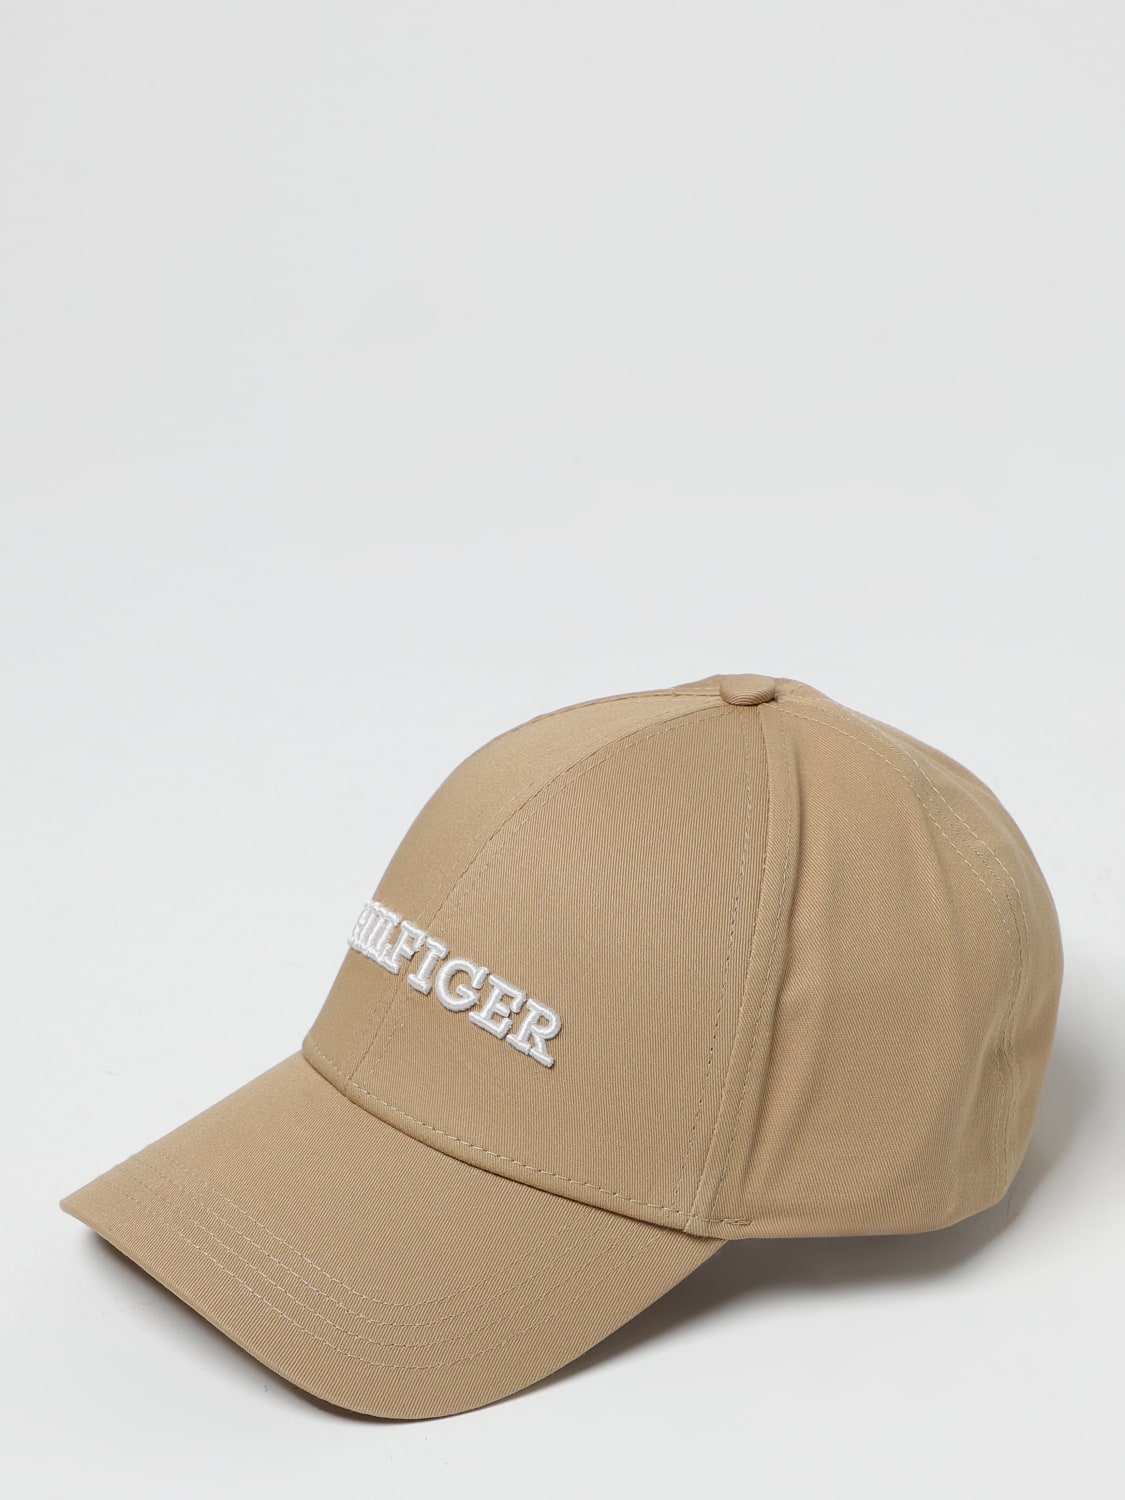 TOMMY HILFIGER: hat | logo AW0AW15532 with Hilfiger at cotton in Beige hat Tommy embroidered online 